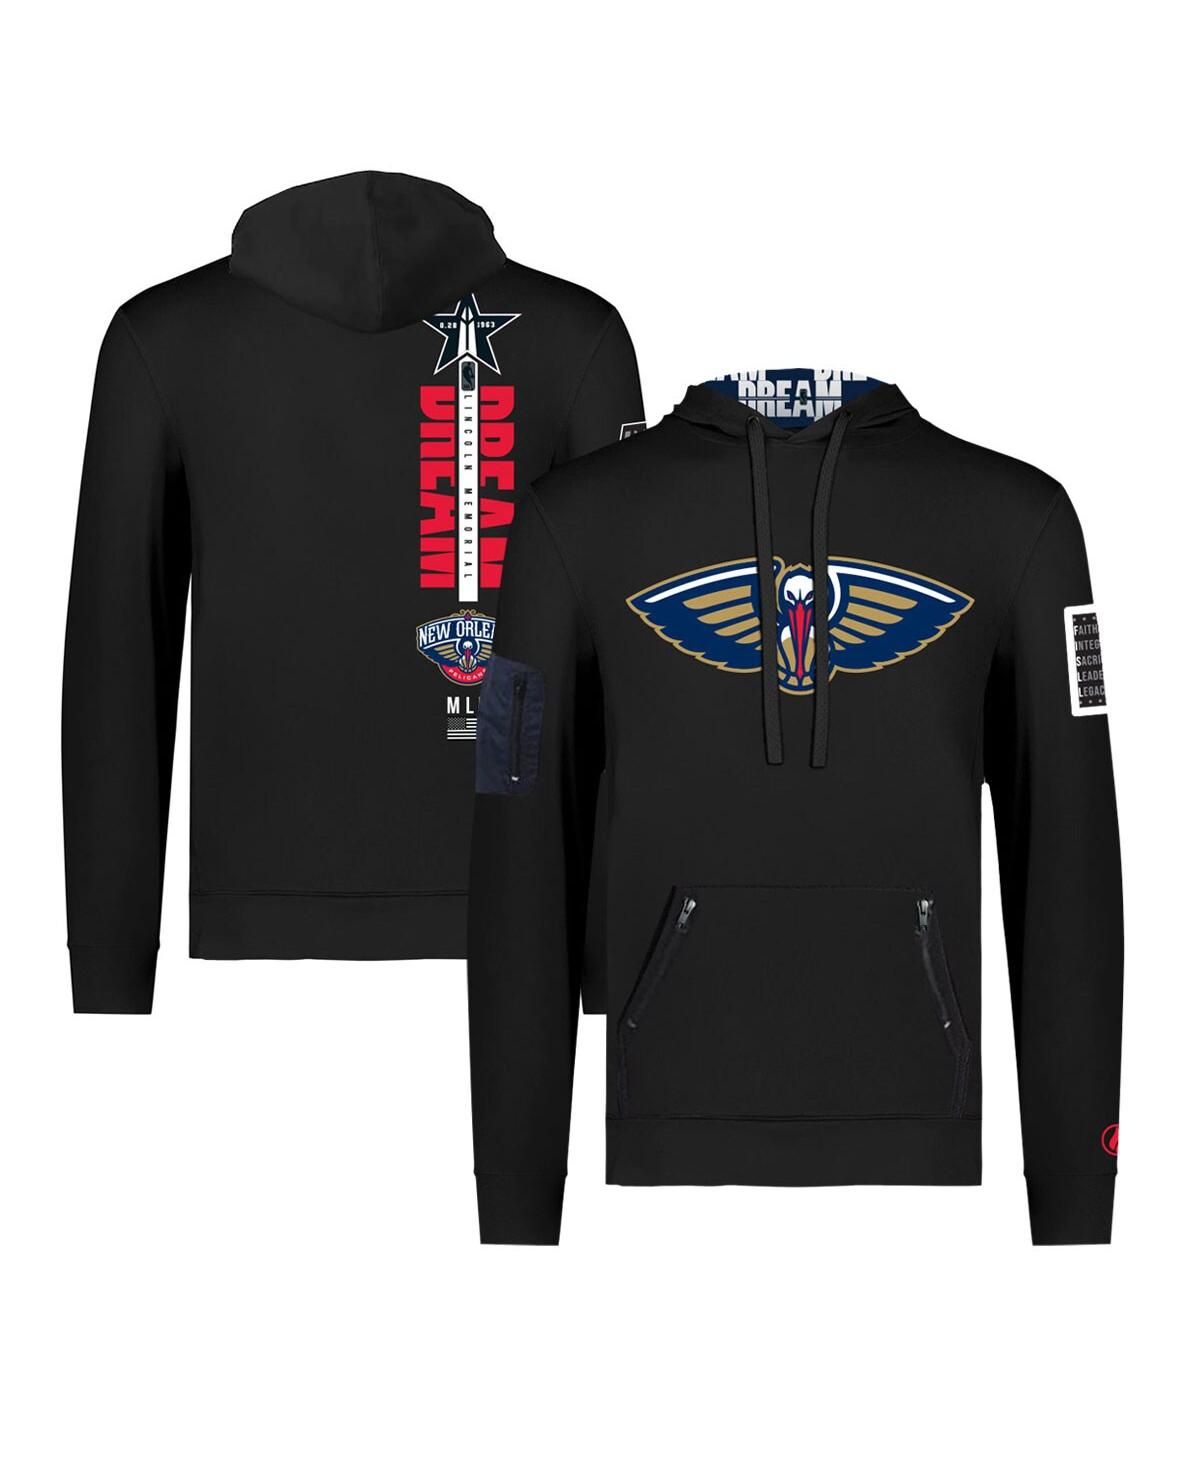 Men's and Women's Fisll x Black History Collection Black New Orleans Pelicans Pullover Hoodie - Black